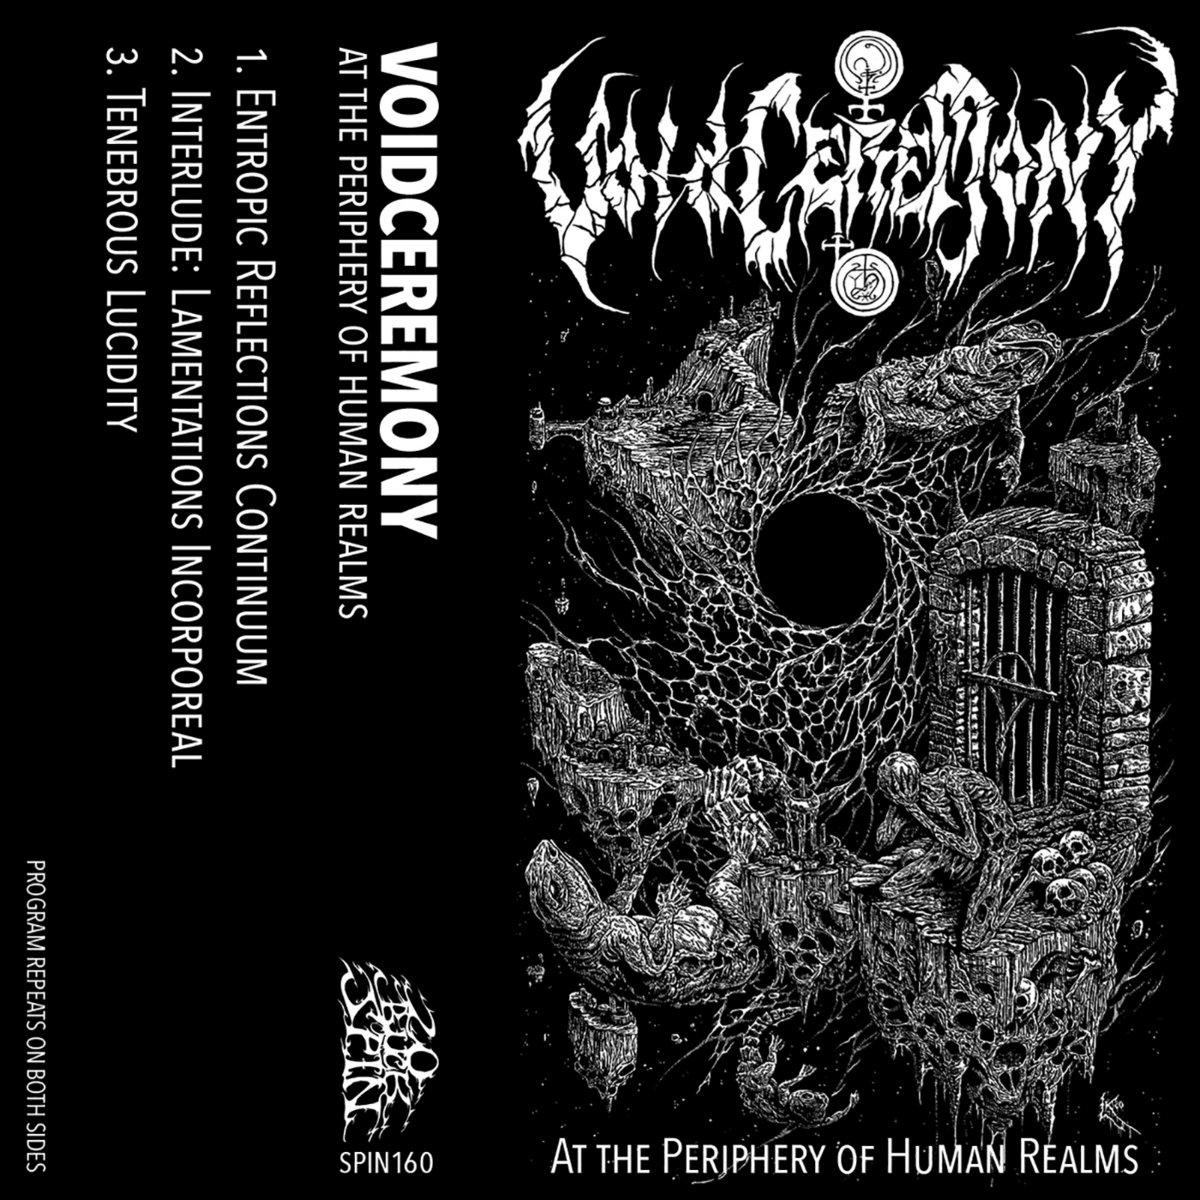 VoidCeremony - "At The Periphery Of Human Realms" Demo - 2022